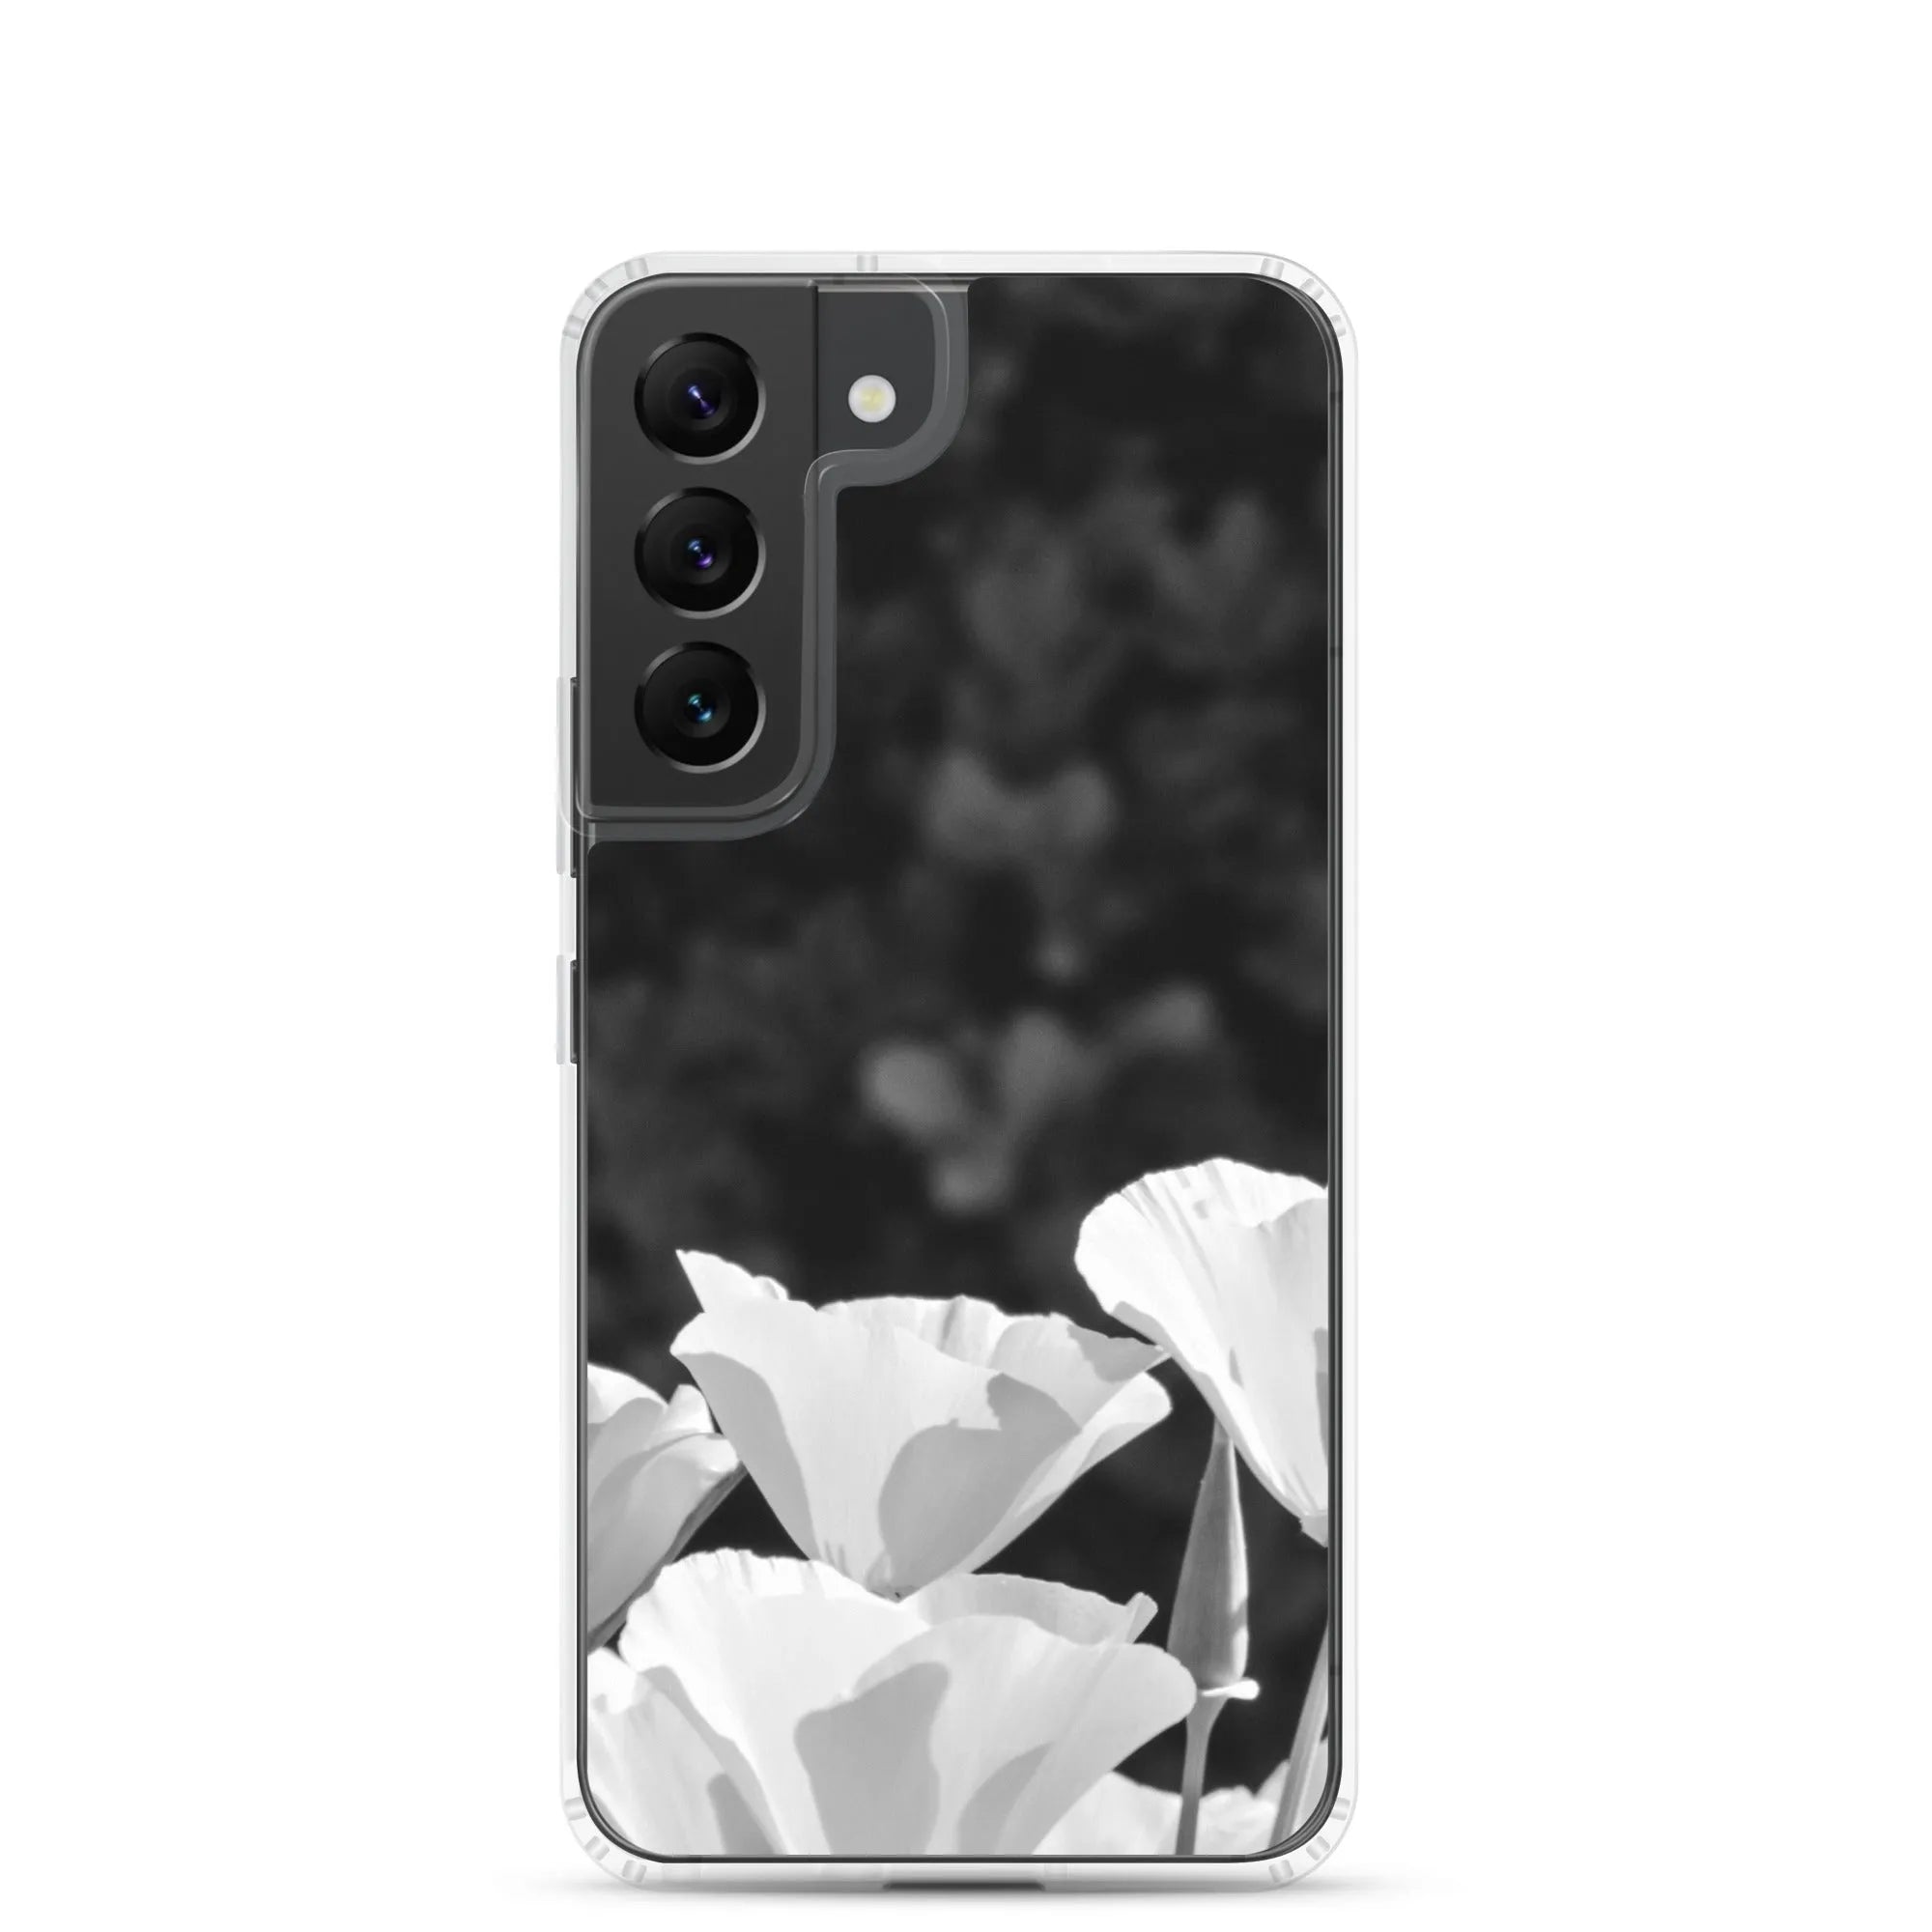 Amber Alert Samsung Galaxy Case - Black And White - Samsung Galaxy S22 - Mobile Phone Cases - Aesthetic Art